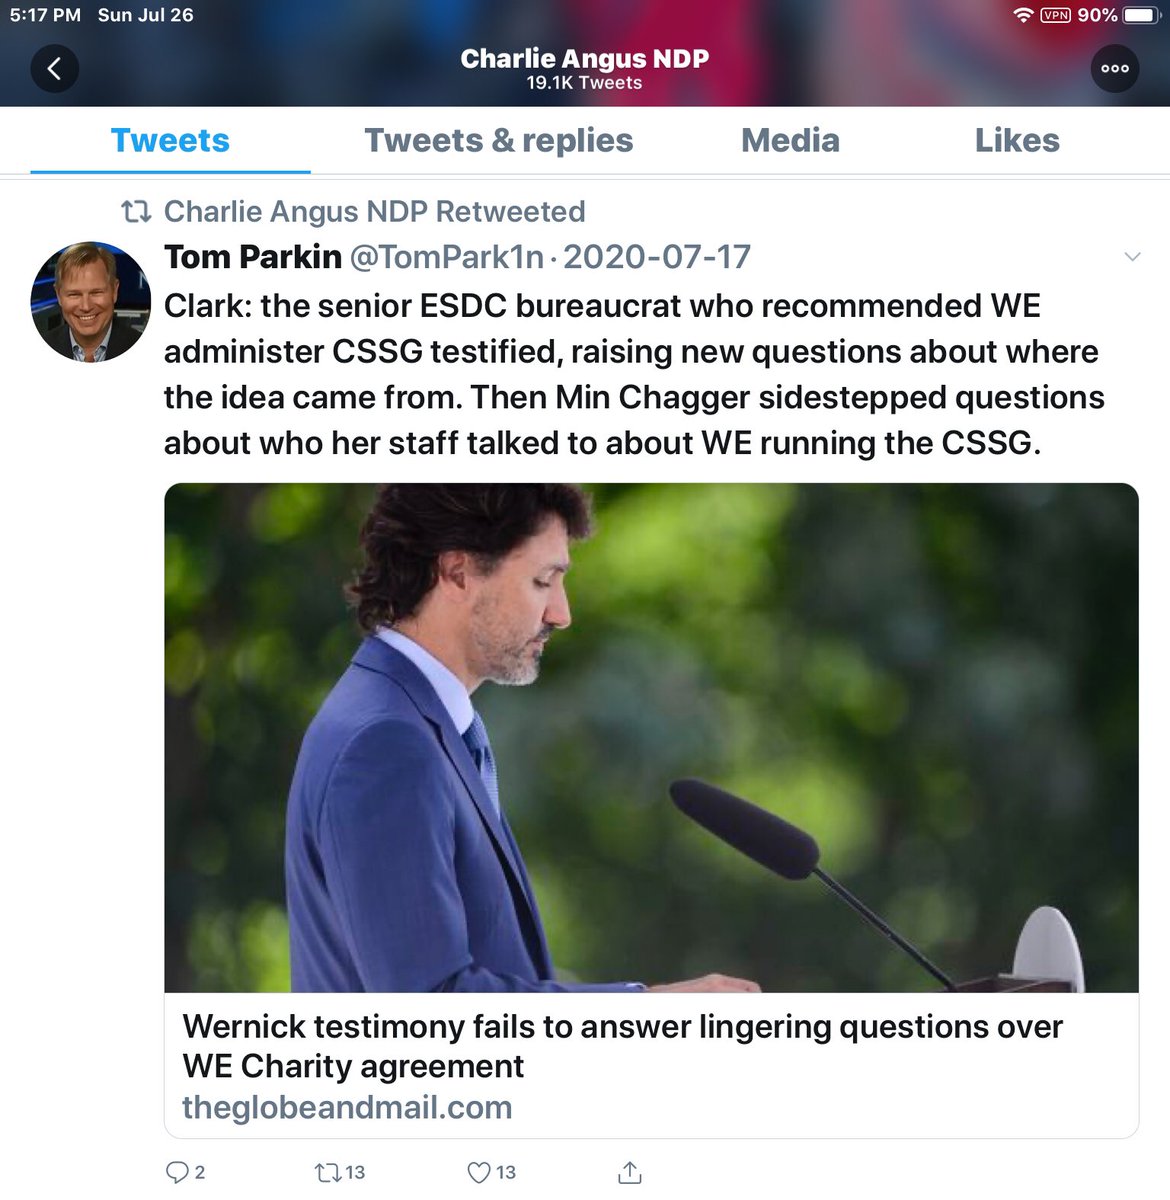 Canadians don’t have all the available facts to make an adequate assessment of the accusation of corruption. They have insinuation, conjecture and false accusations presented as facts. Framed to be convincing.